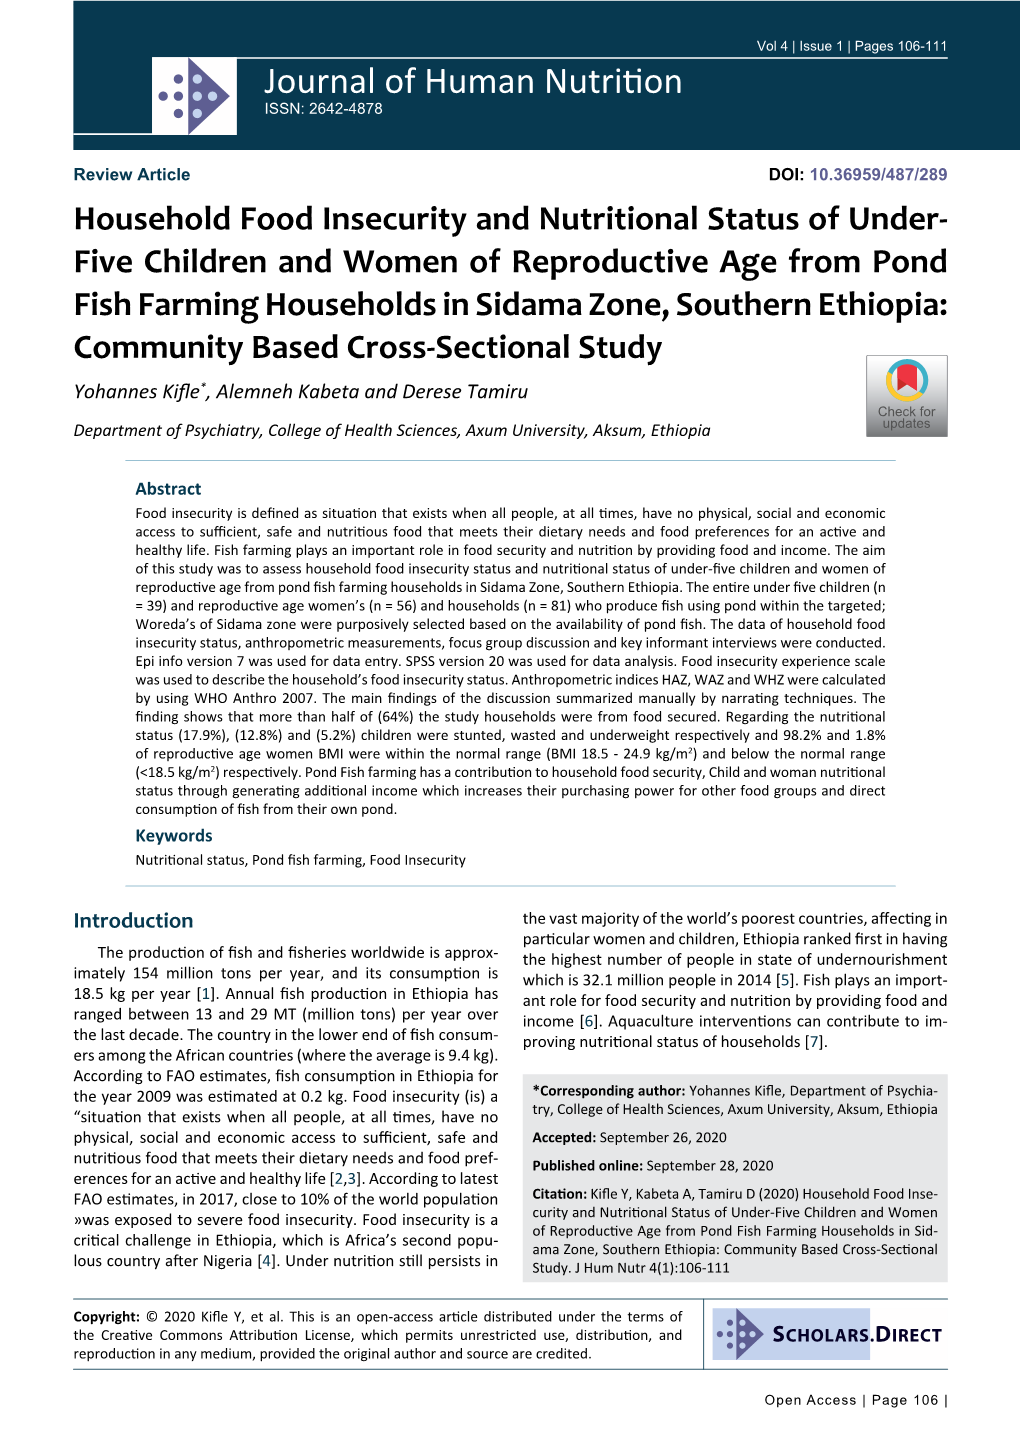 Household Food Insecurity and Nutritional Status of Under-Five